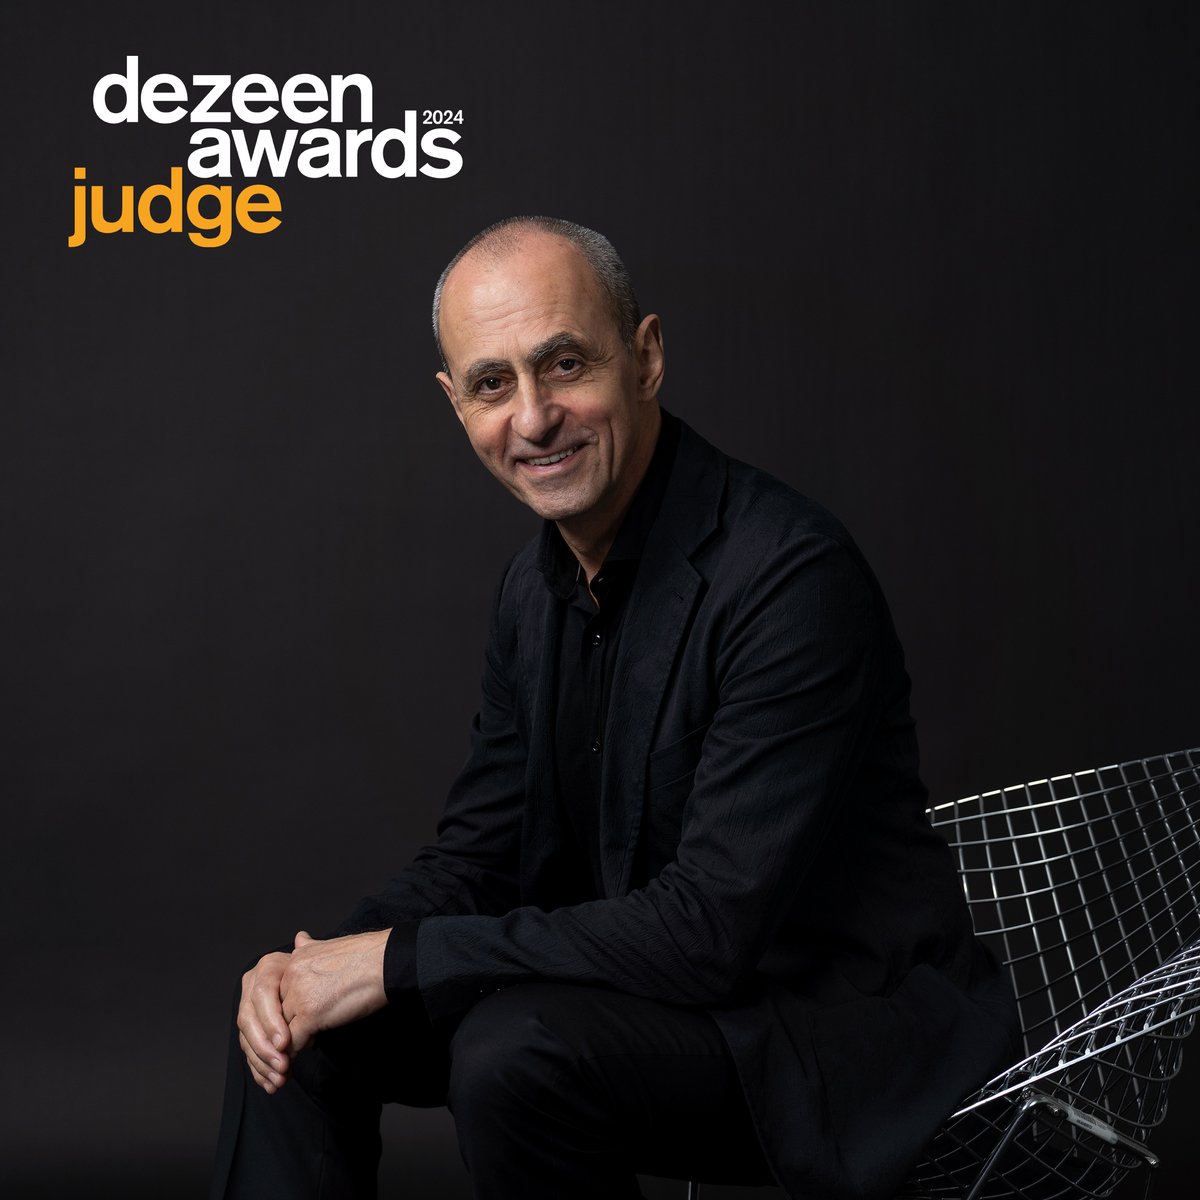 Thank you for inviting #Aedas Chairman Keith Griffiths, as one of the judges together with #ChristianLouboutin and #JomoTariku for the prestigious Dezeen Awards 2024. 

#design #architect #architecture #awards #judge #DesignExcellence #dezeen #dezeenawards @dezeen @dezeenawards